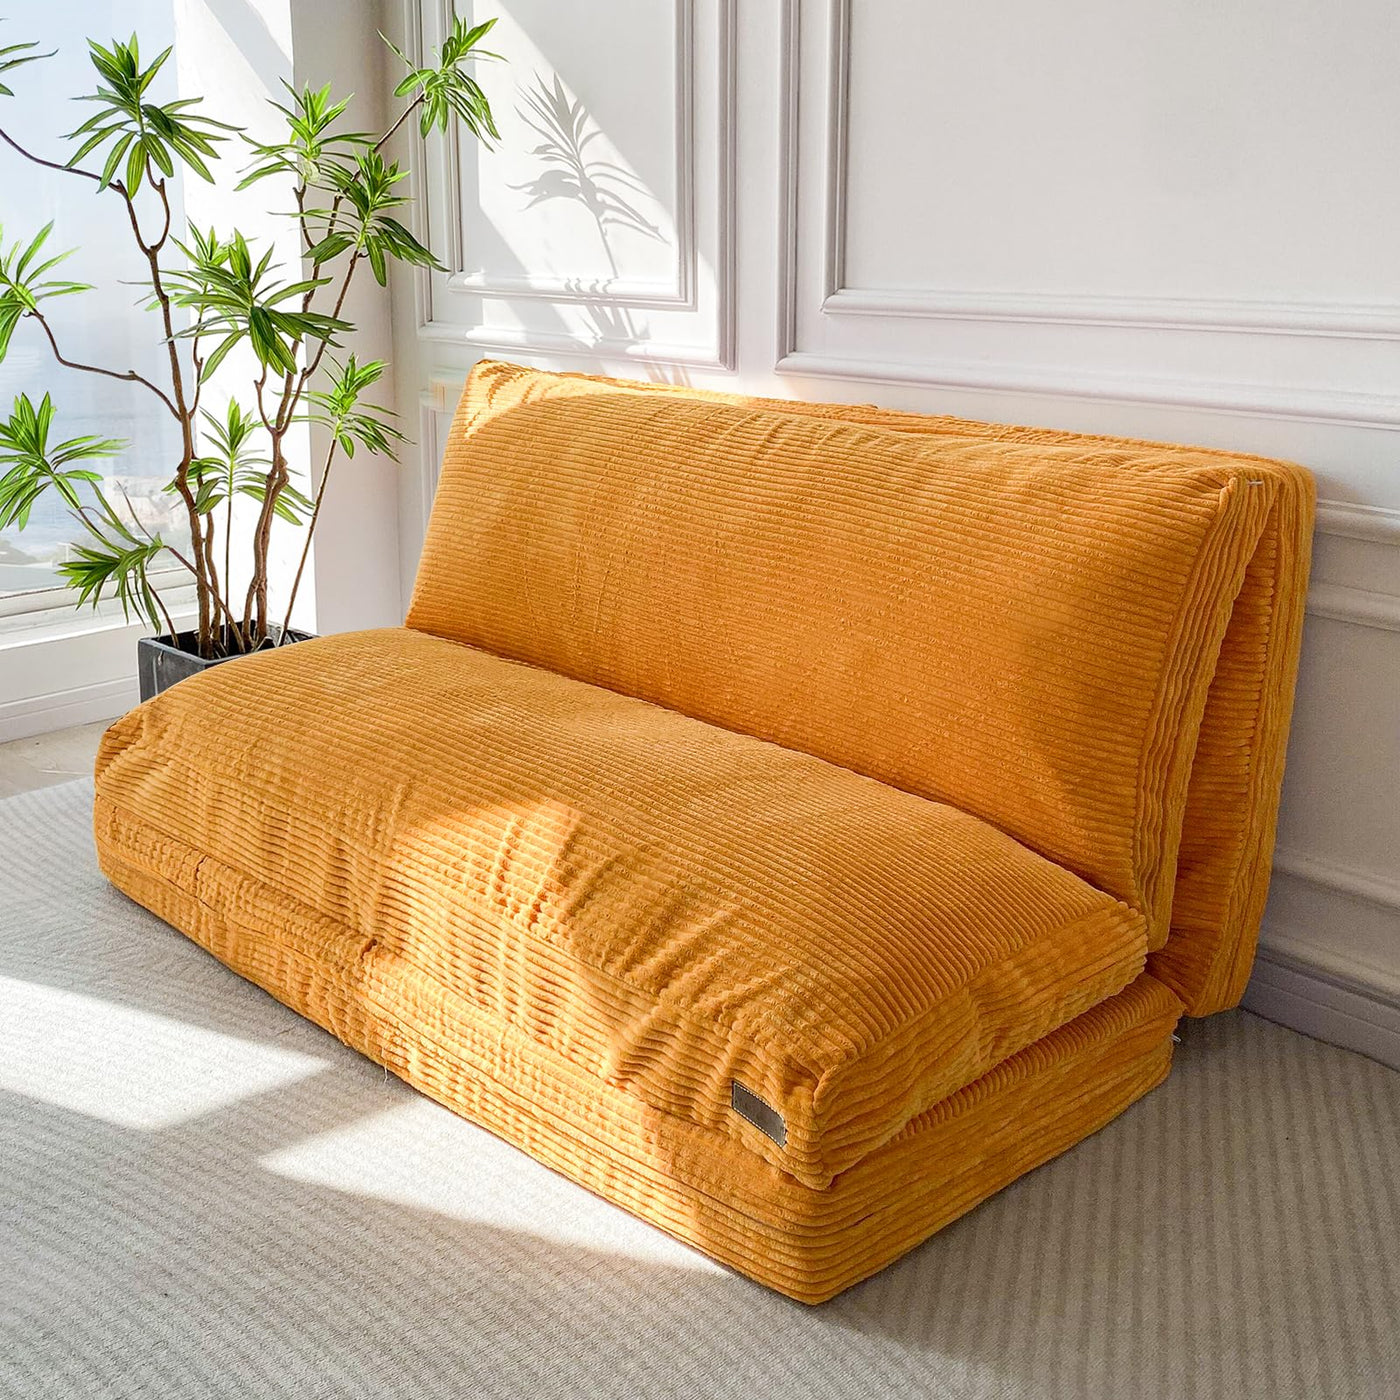 MAXYOYO Bean Bag Folding Sofa Bed with Corduroy Washable Cover, Extra Thick and Long Floor Sofa for Adults, Orange